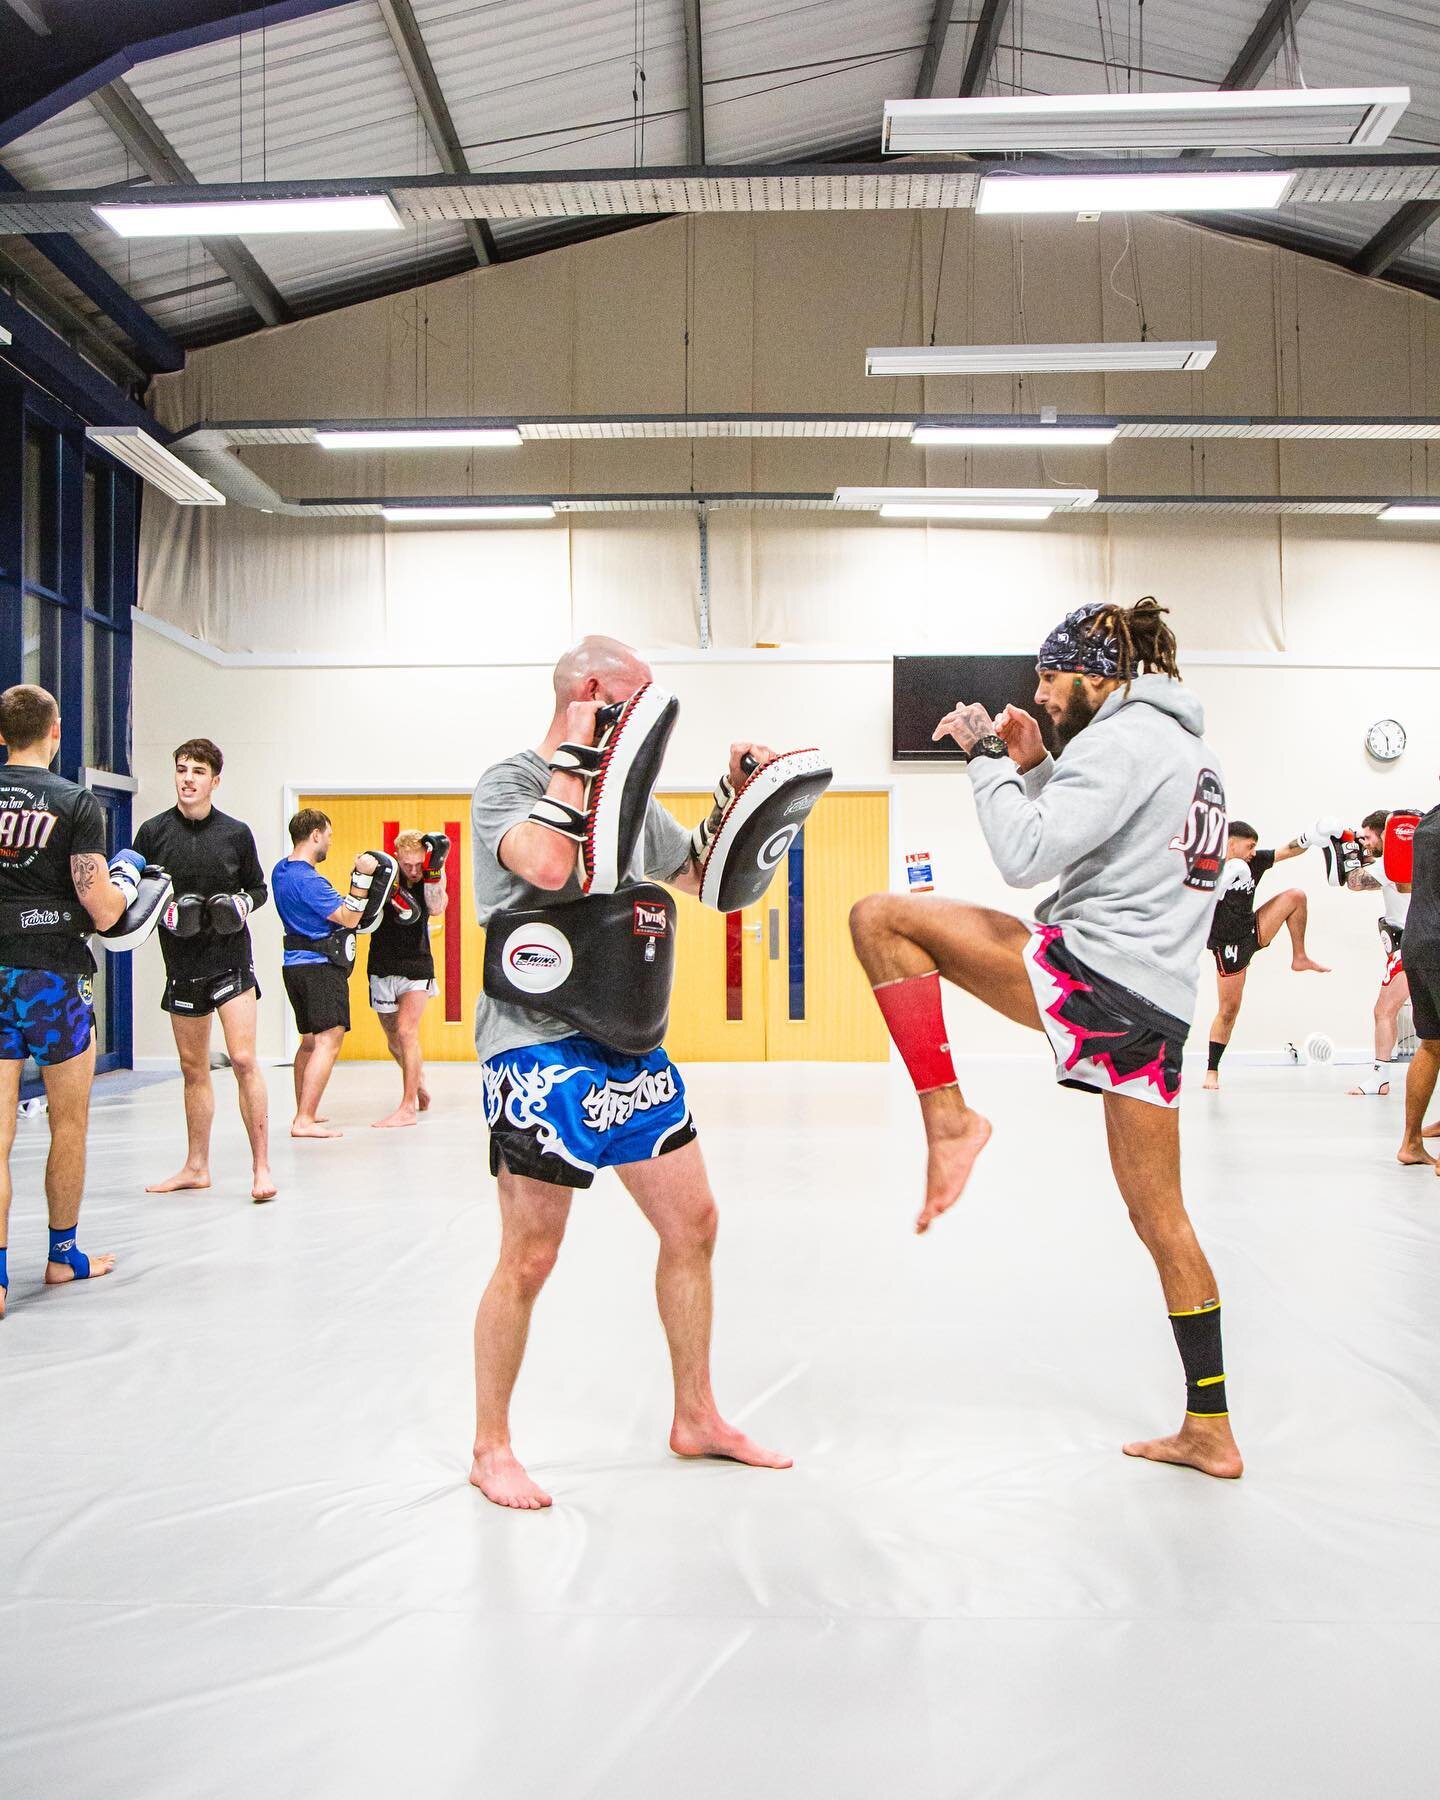 Morning class is out of the way and Tuesday&rsquo;s action continues with Muay Thai from 5pm. Jiu jitsu is on from 6pm onwards.